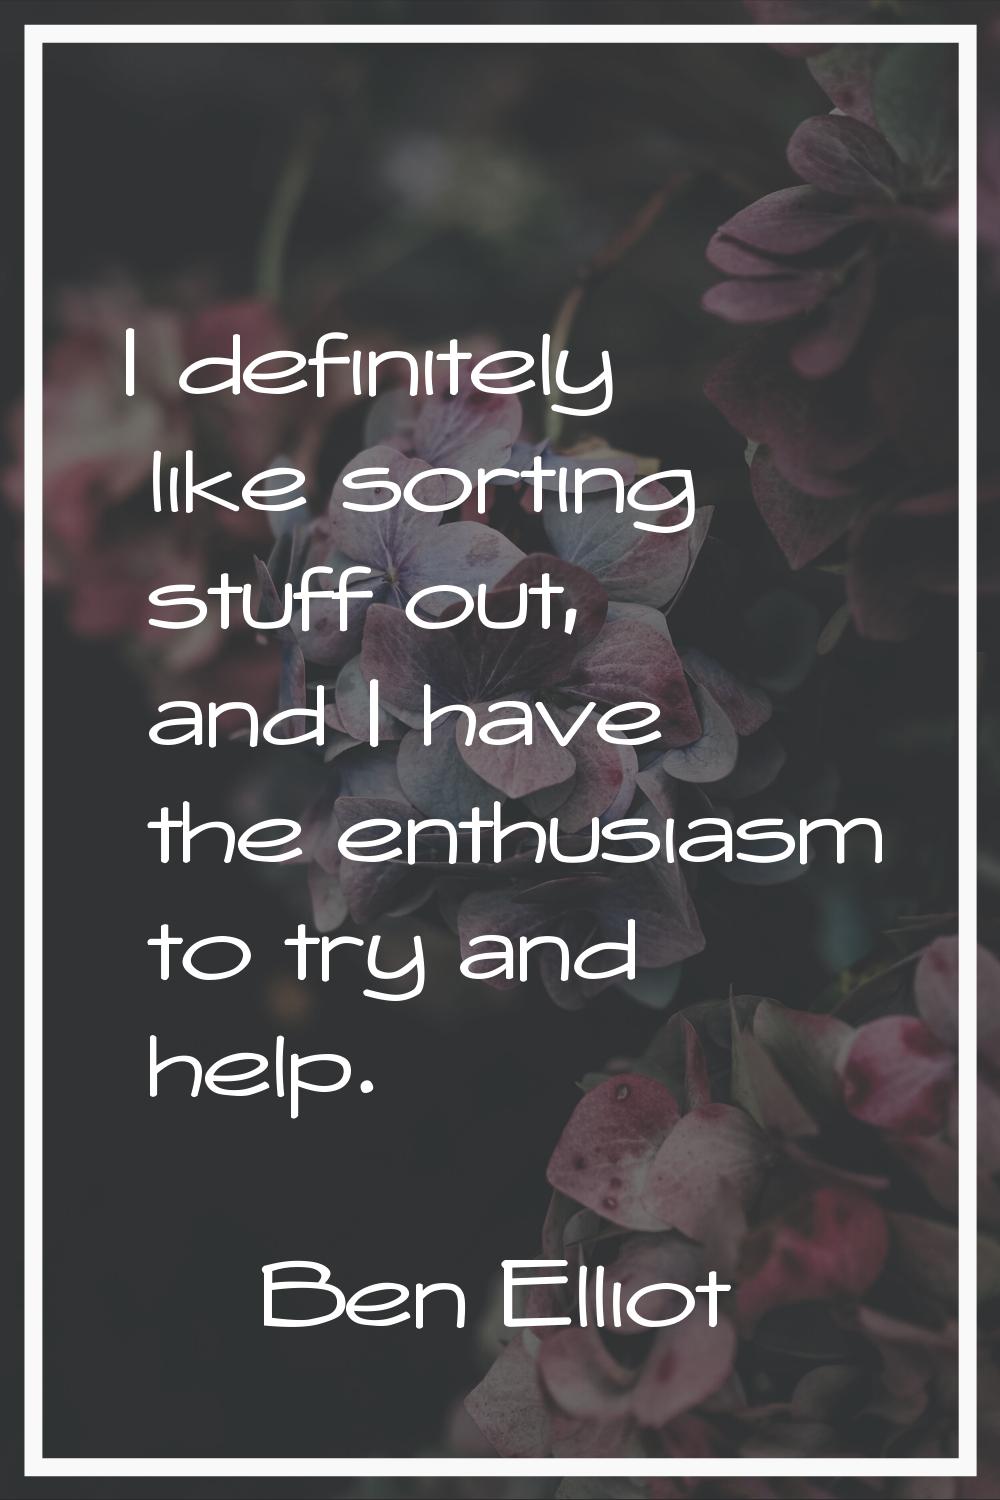 I definitely like sorting stuff out, and I have the enthusiasm to try and help.